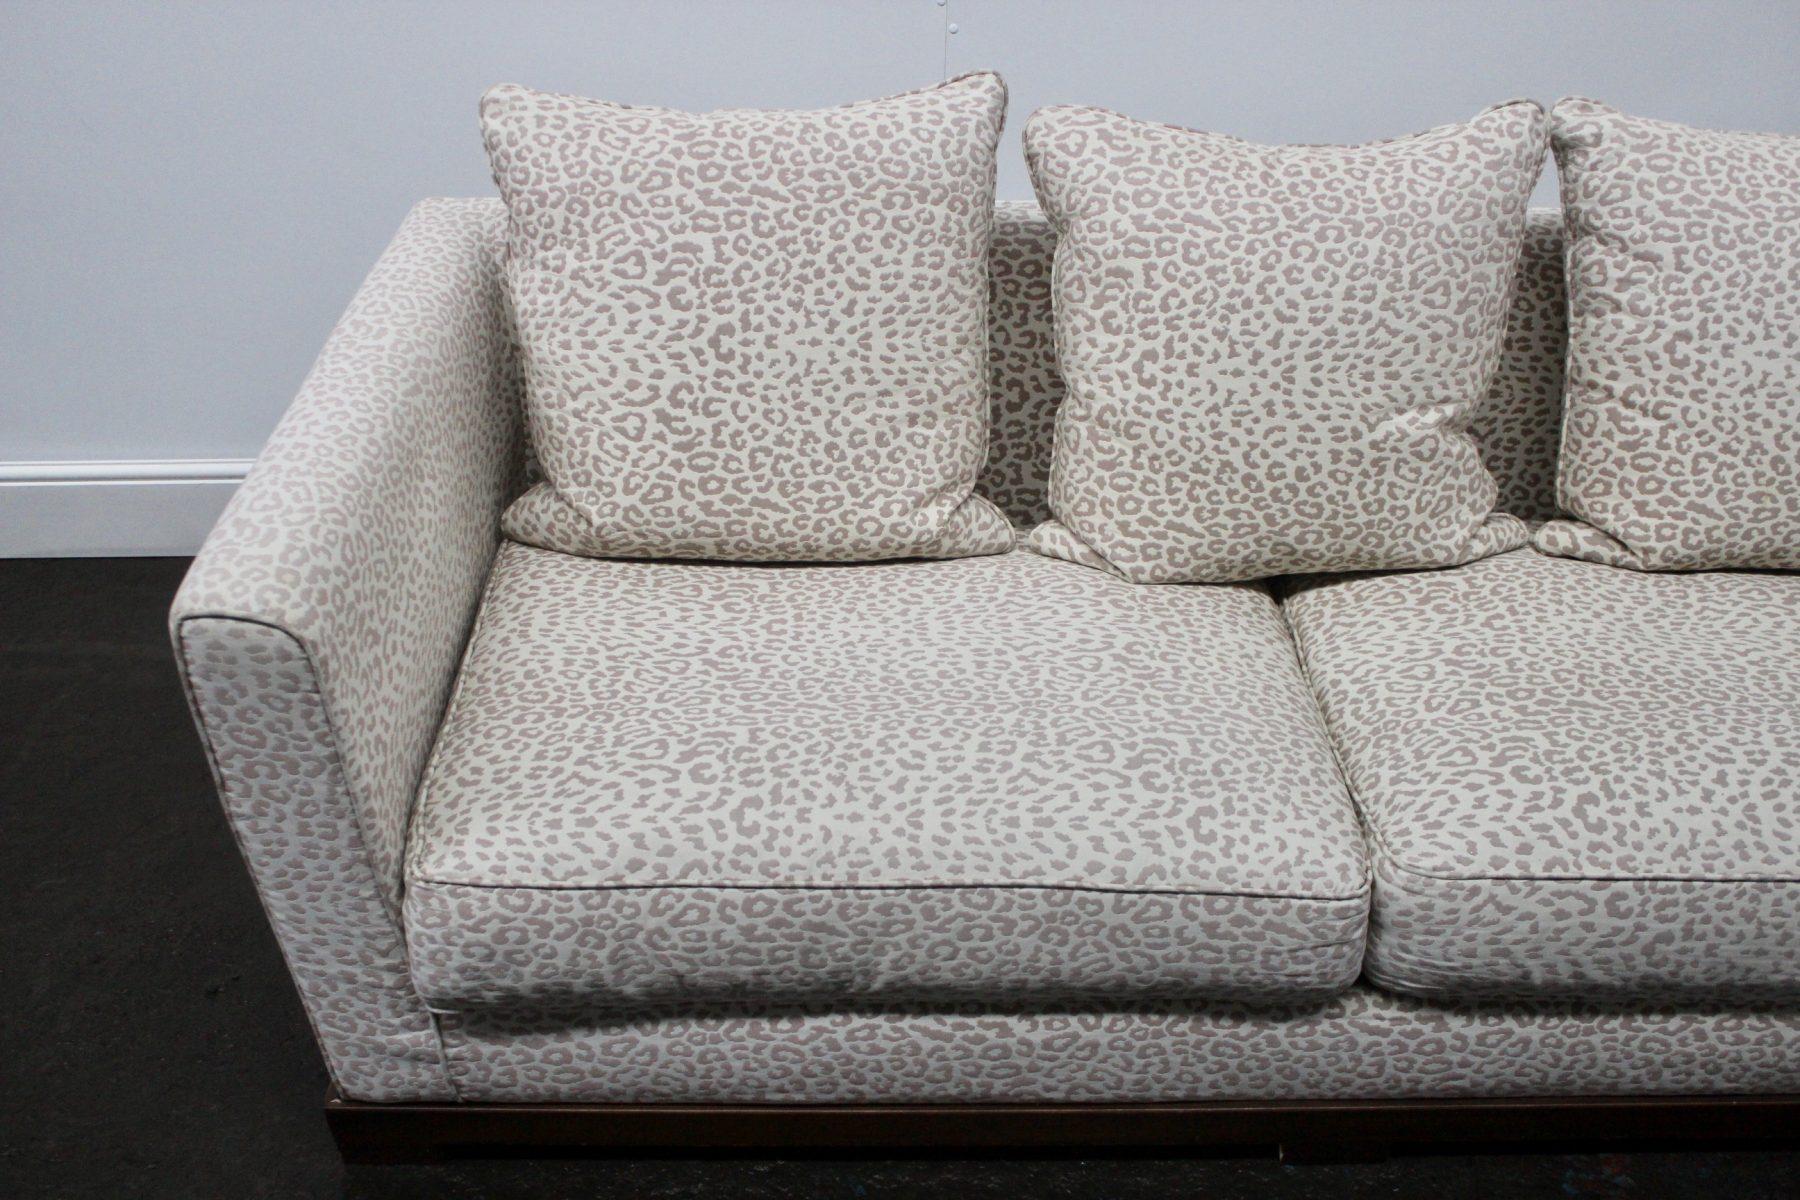 On offer on this occasion is a superb, rare Promemoria “Wanda” 2.5-Seat Cushion-Back Sofa, dressed in a peerless top-grade Leopard-Print fabric.

As you will no doubt be aware by your interest in this Romeo Sozzi masterpiece, Promemoria pieces are